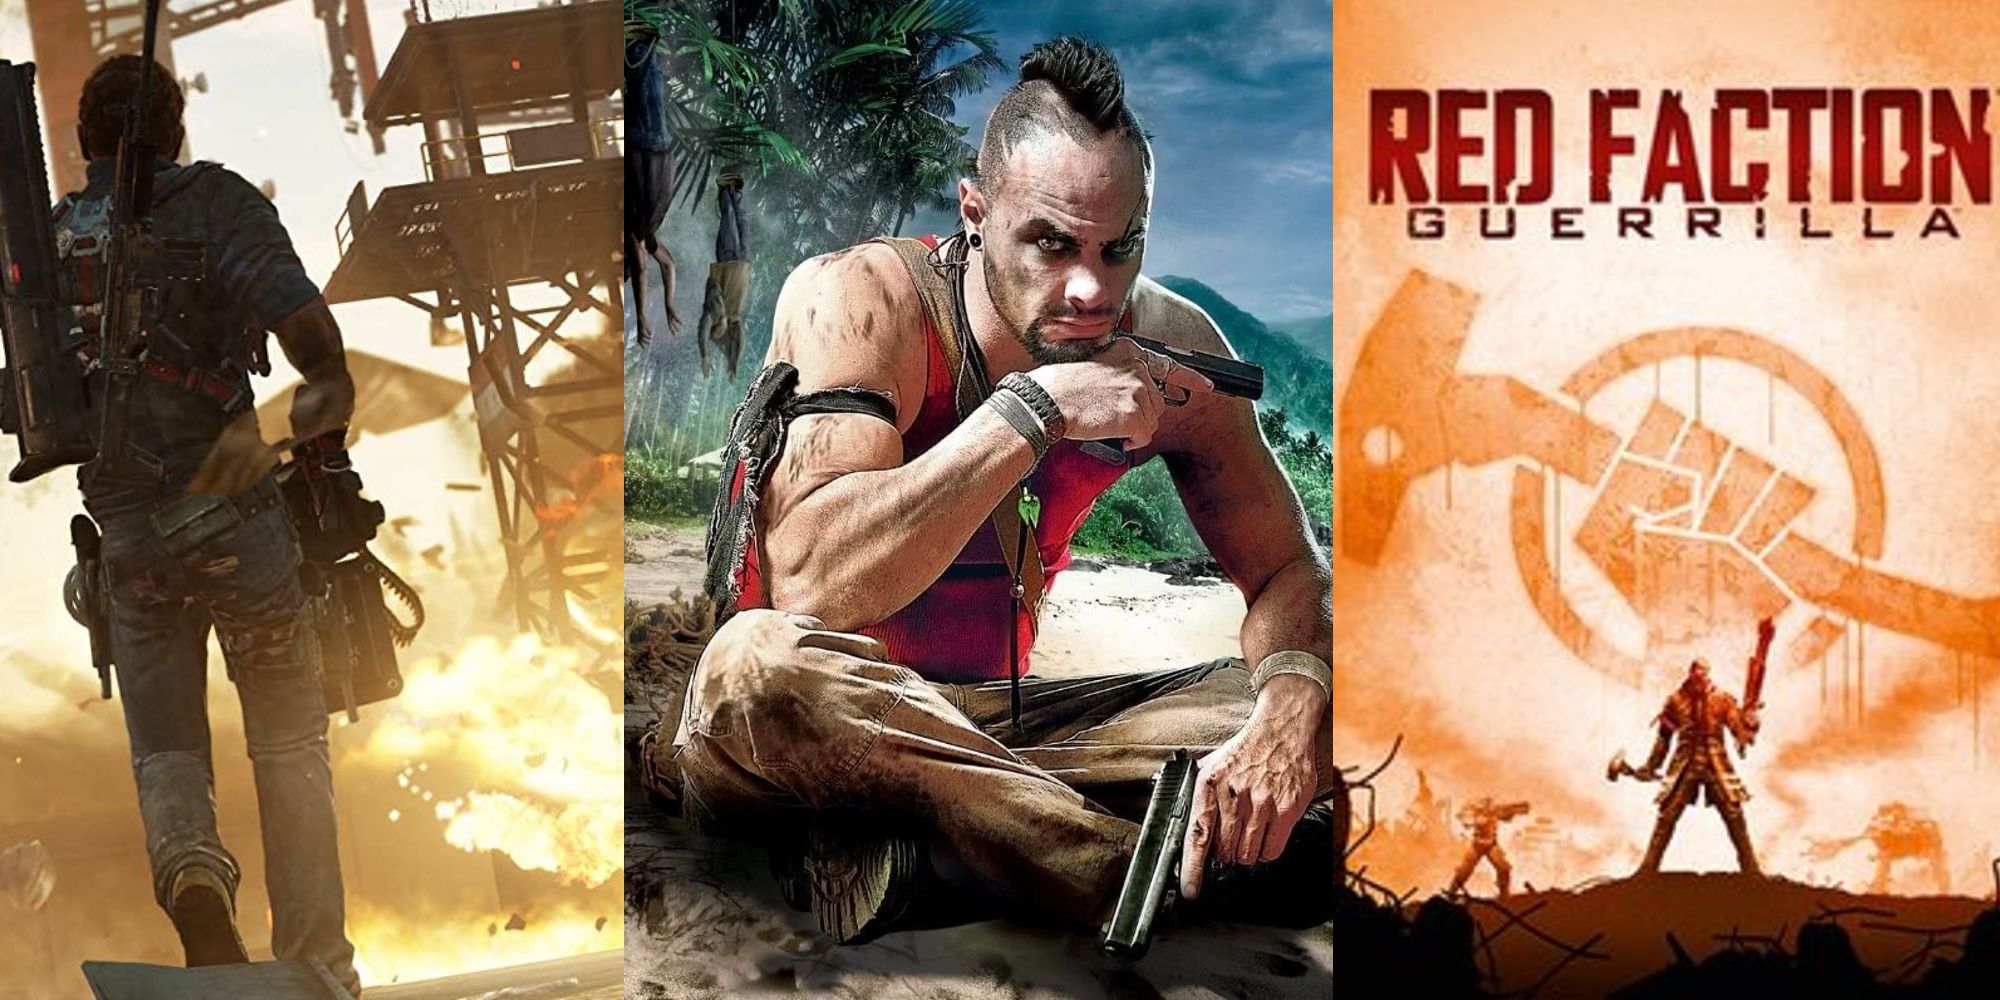 Split image person walking into flaming area, Far Cry character sitting on beach, and Red Faction Guerrilla Logo image